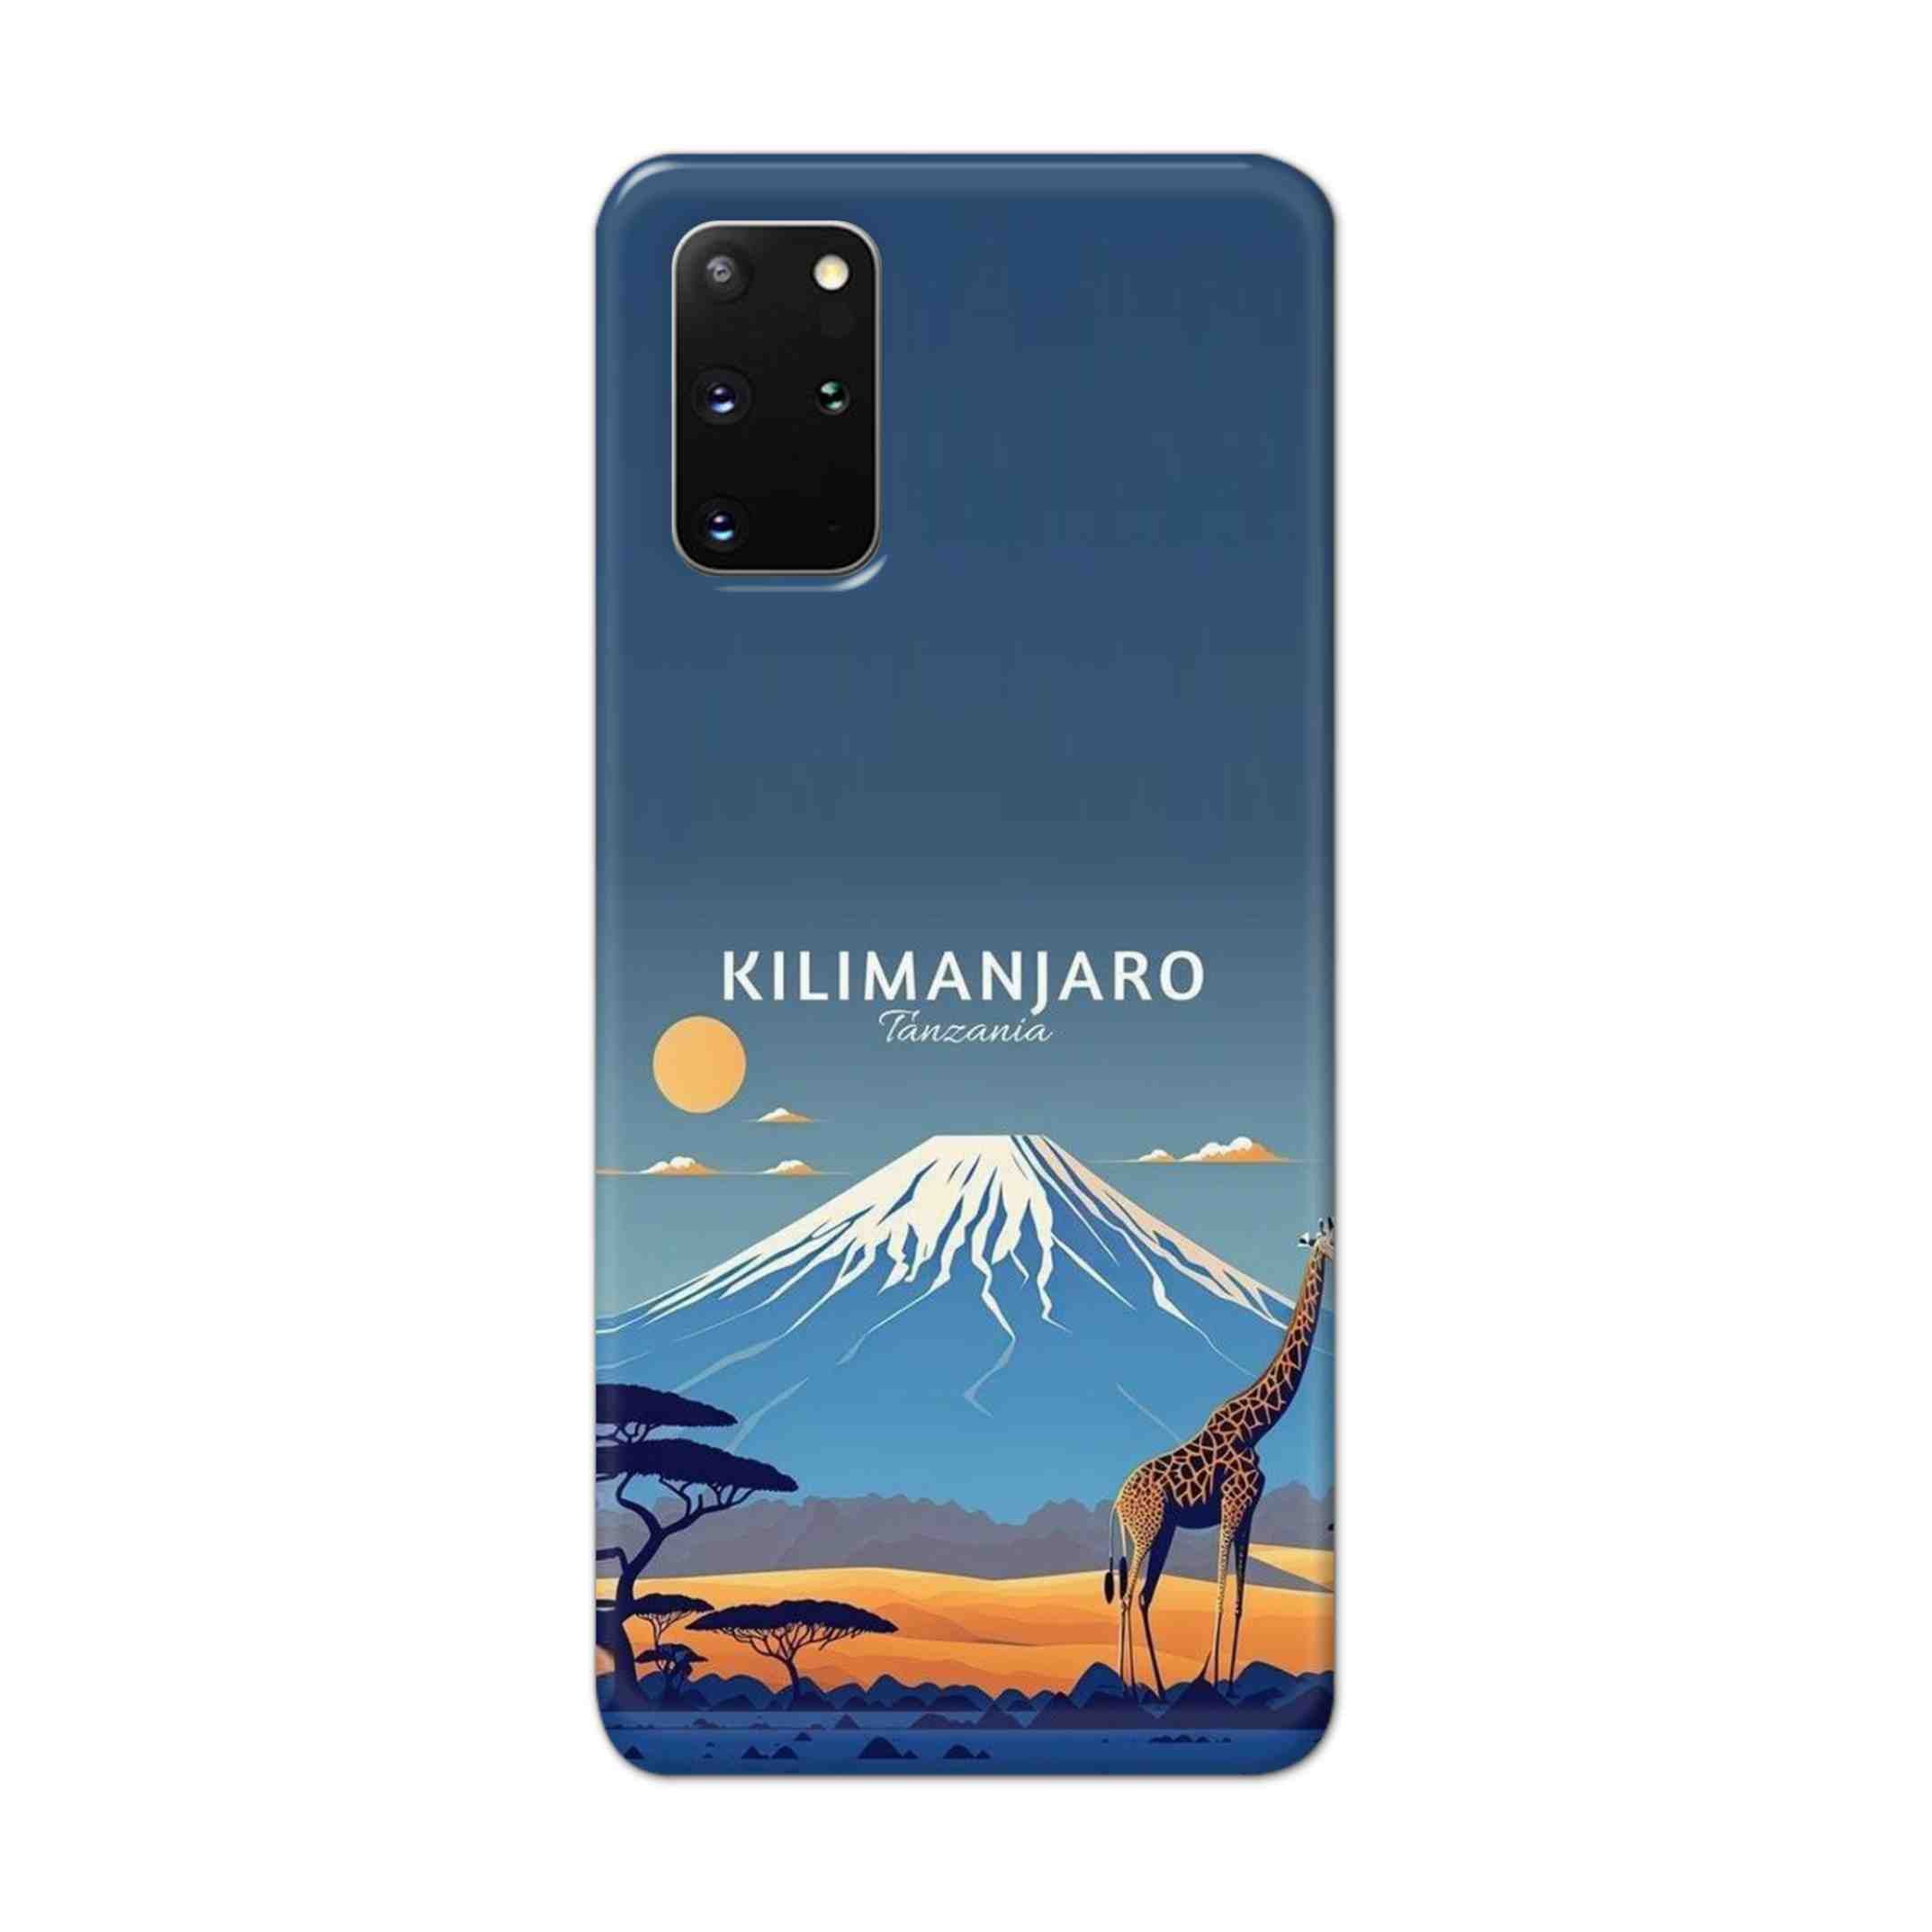 Buy Kilimanjaro Hard Back Mobile Phone Case Cover For Samsung Galaxy S20 Plus Online